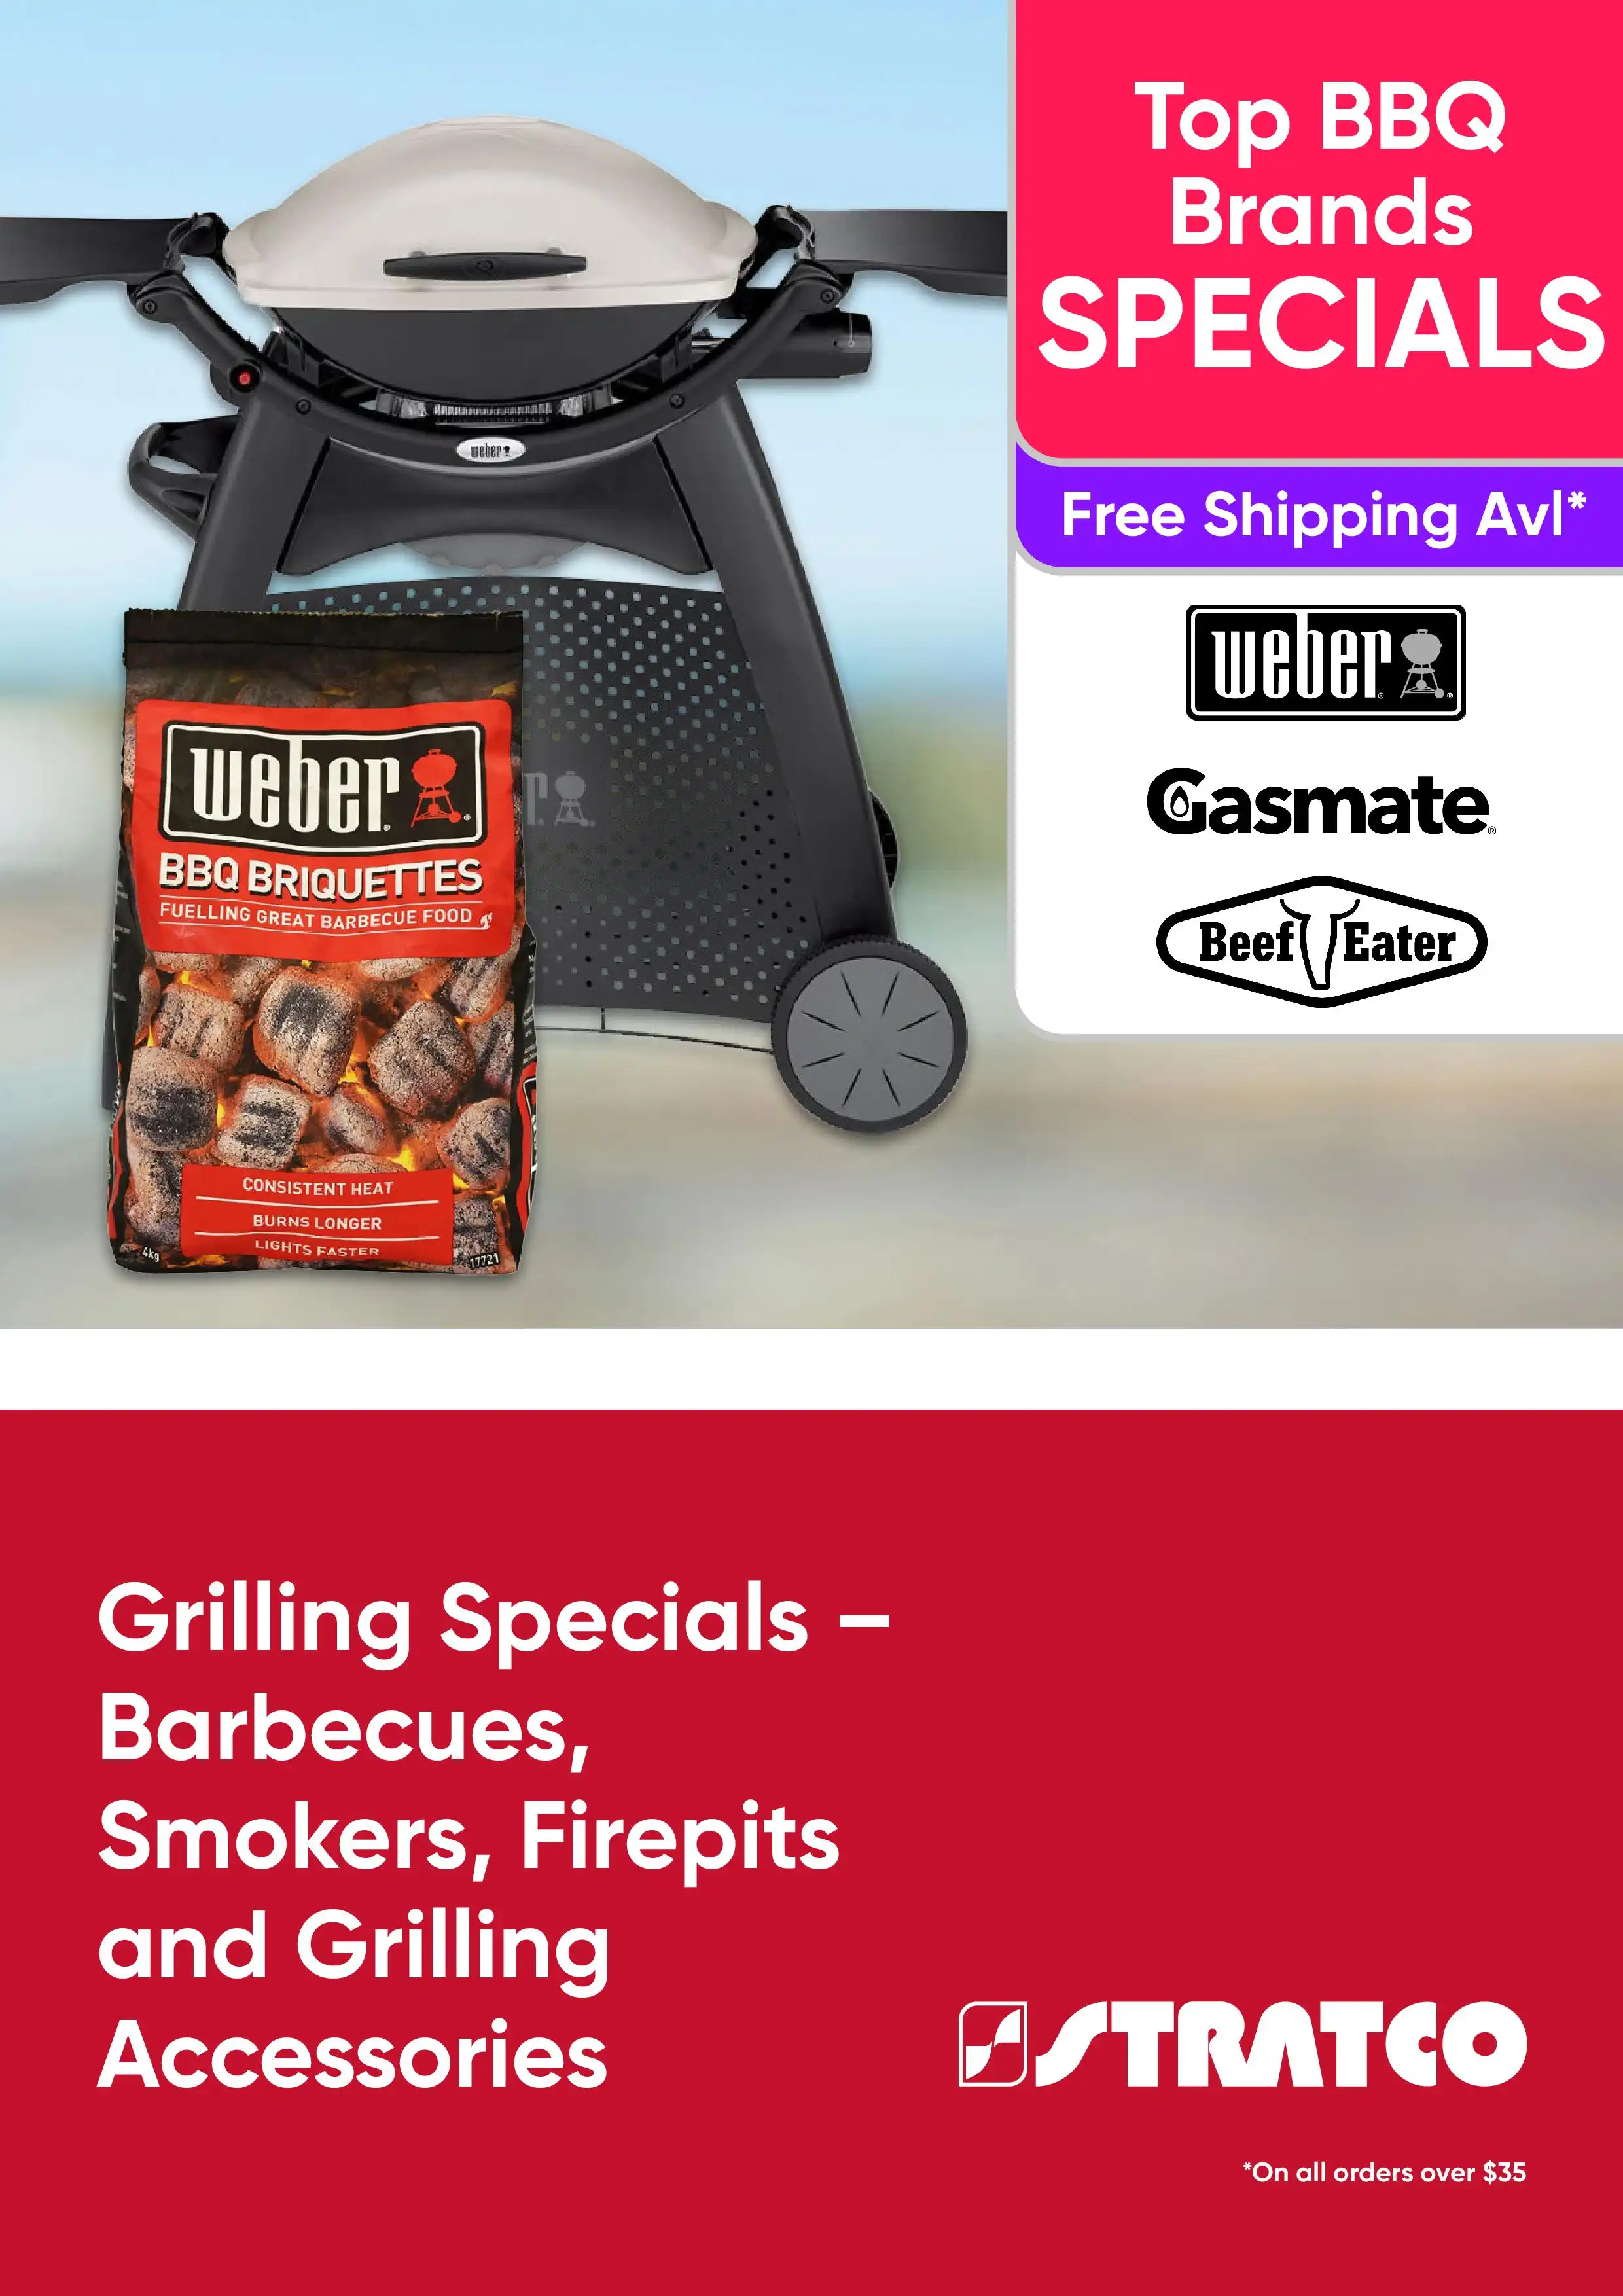 Grilling Specials - Barbecues, Smokers, Firepits and Grilling Accessories - NSW